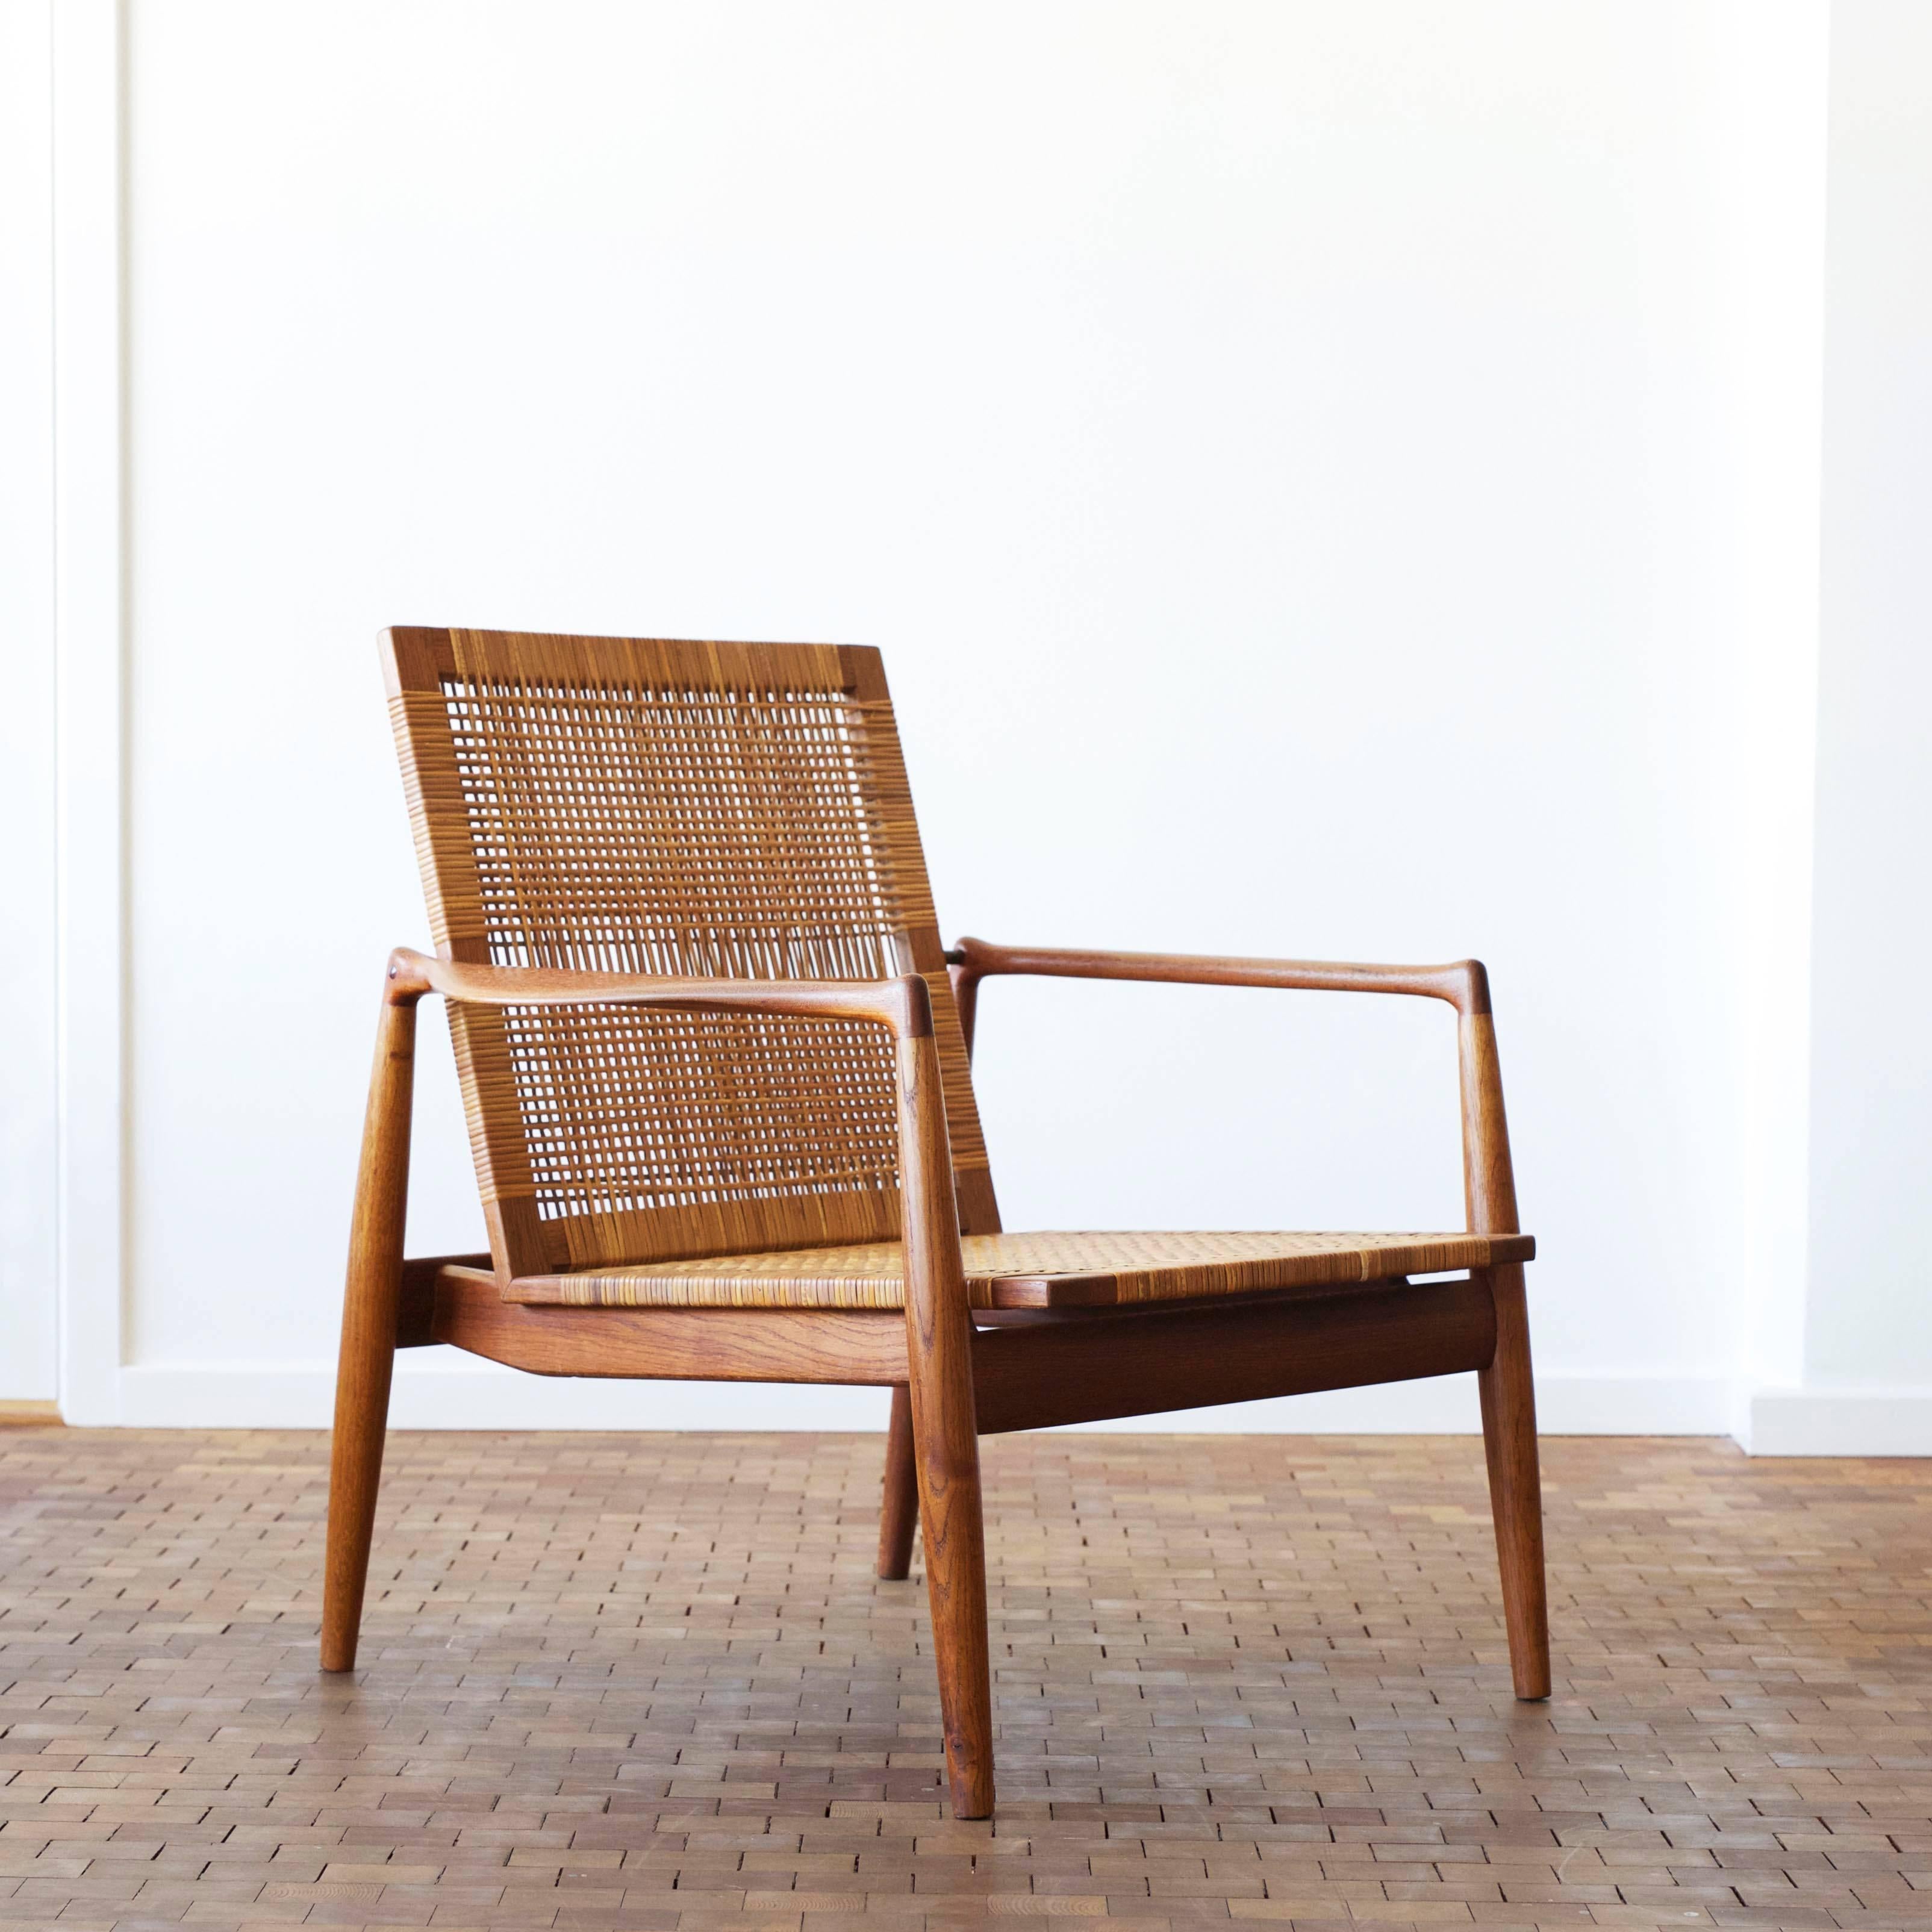 Beautiful Finn Juhl easy chair with frame of original patinated oak, arms of teak, back and seat upholstered with woven cane.

Designed by Finn Juhl 1954, manufactured by Søren Willadsen, Denmark 1950s, model SW96. Executed in limited